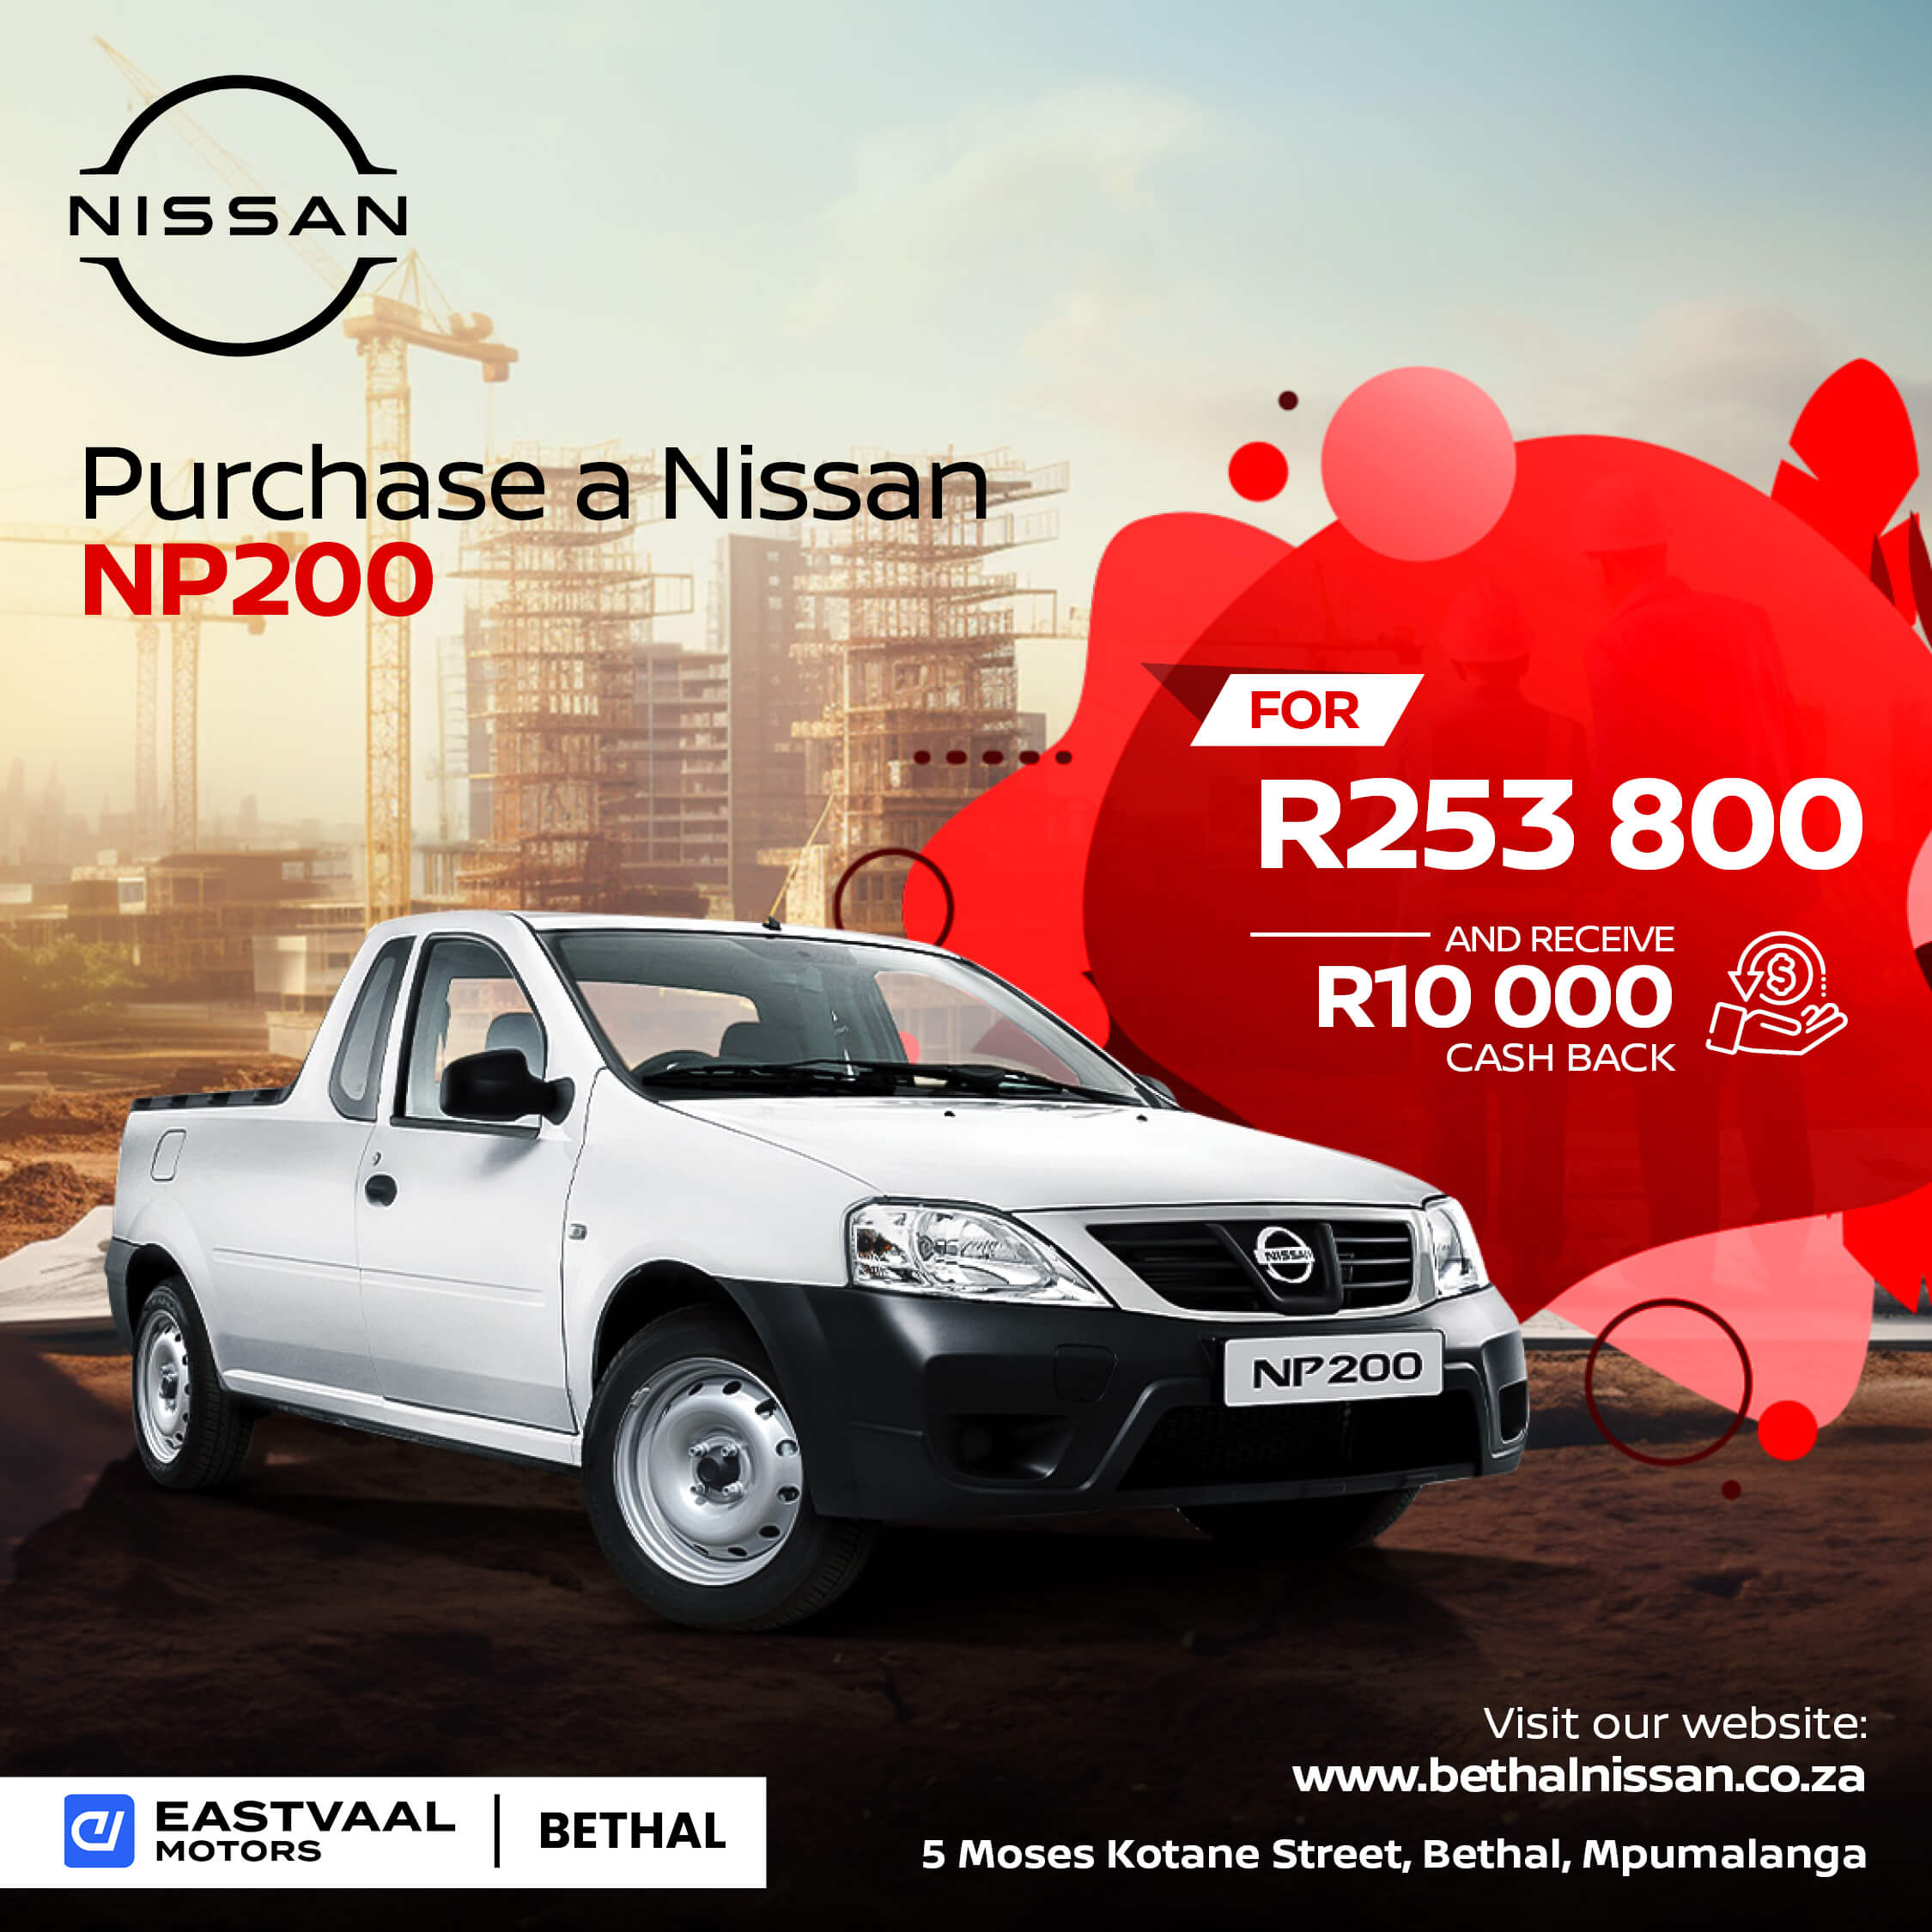 Purchase a Nissan NP200 image from 